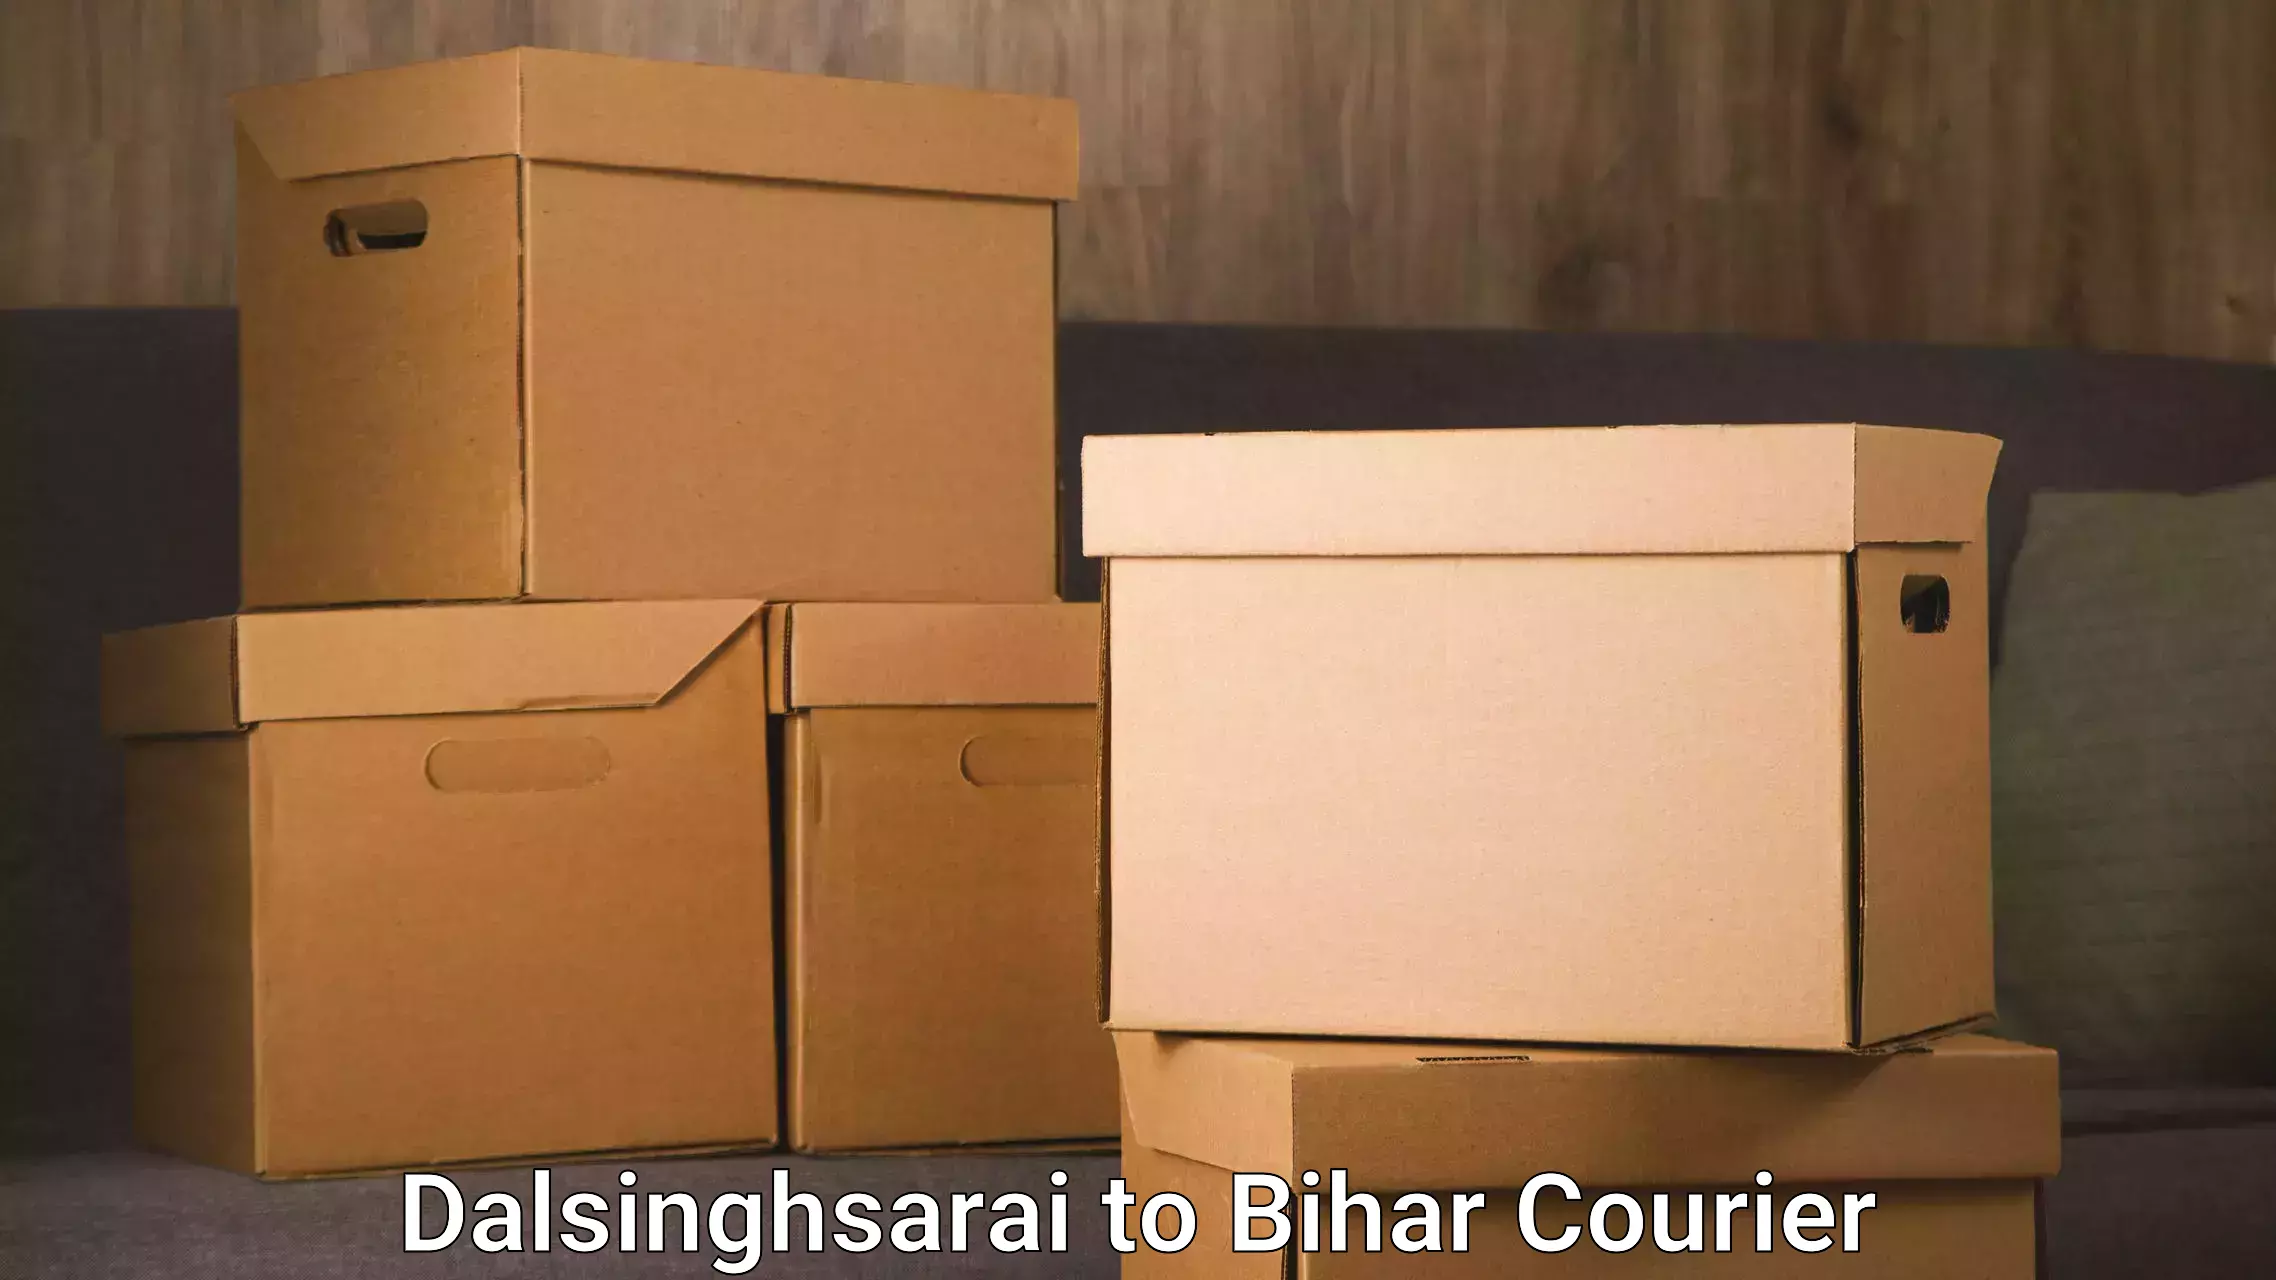 Professional packing and transport Dalsinghsarai to Bihar